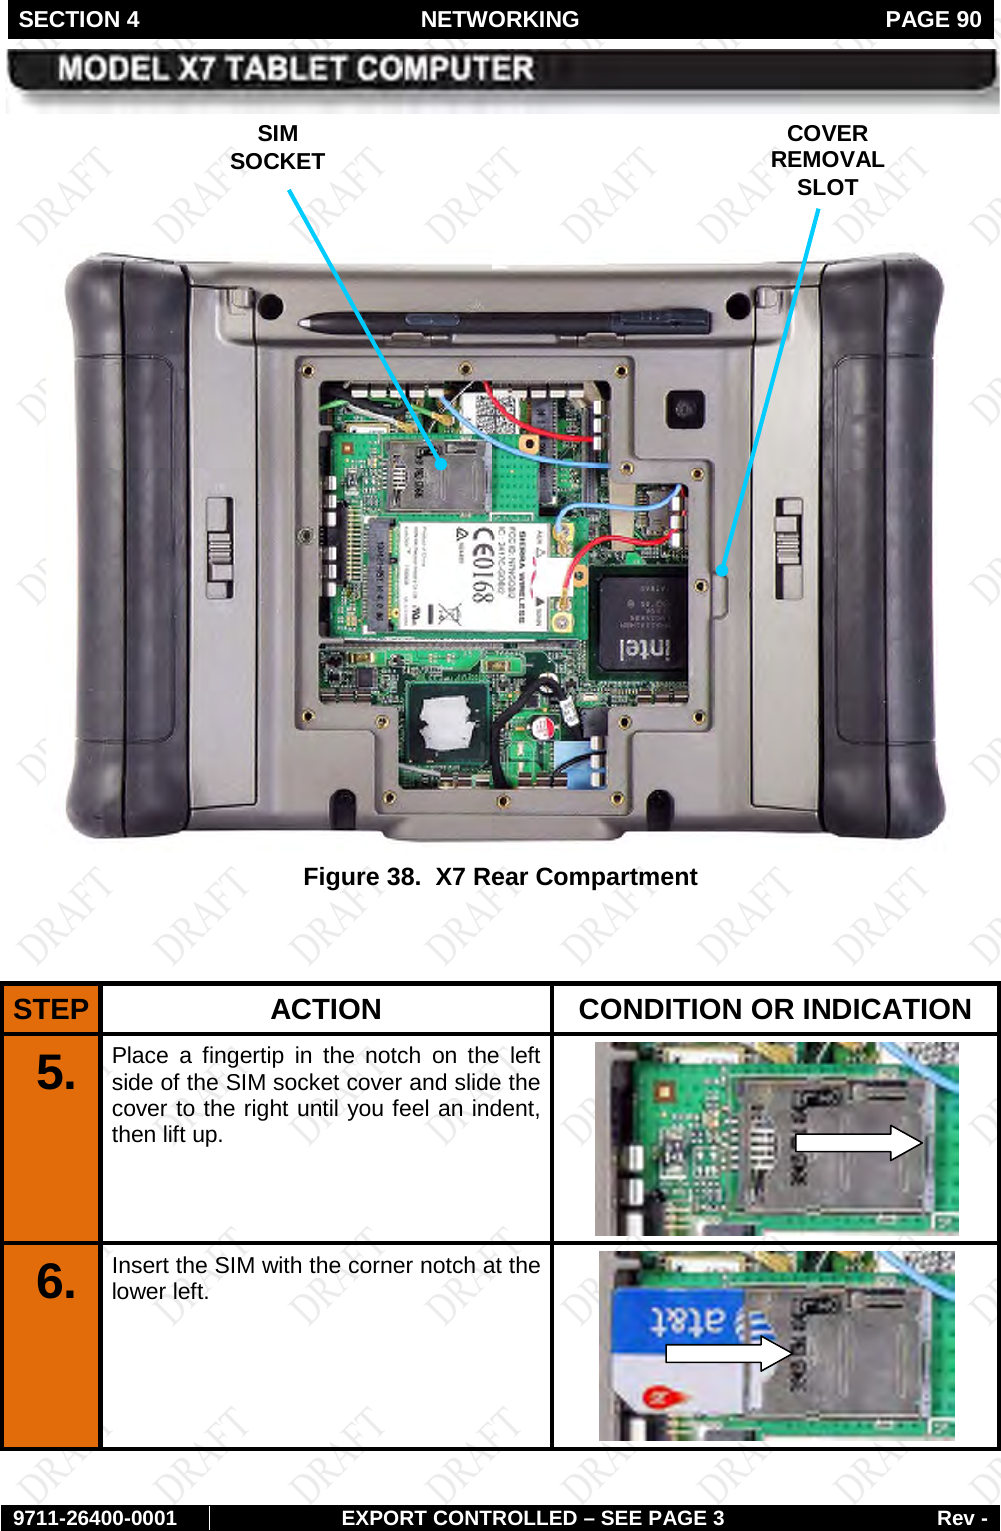 SECTION 4 NETWORKING  PAGE 90        9711-26400-0001 EXPORT CONTROLLED – SEE PAGE 3 Rev -     Figure 38.  X7 Rear Compartment   STEP  ACTION CONDITION OR INDICATION 5.  Place a fingertip in the notch on the left side of the SIM socket cover and slide the cover to the right until you feel an indent, then lift up.  6.  Insert the SIM with the corner notch at the lower left.  SIM SOCKET COVER REMOVAL SLOT 